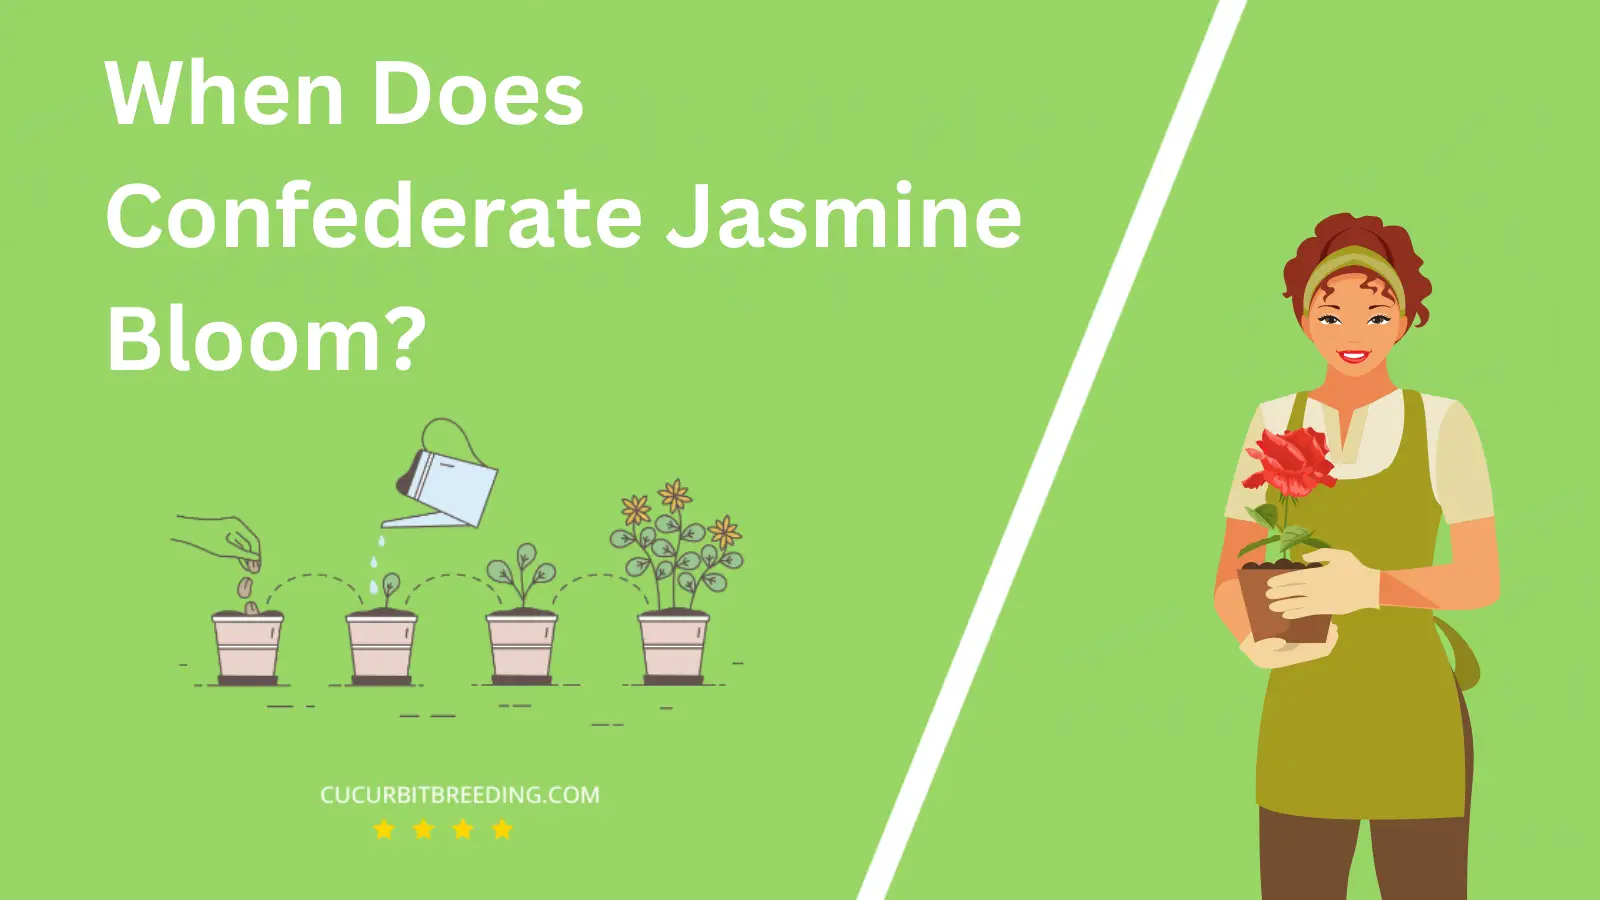 When Does Confederate Jasmine Bloom?